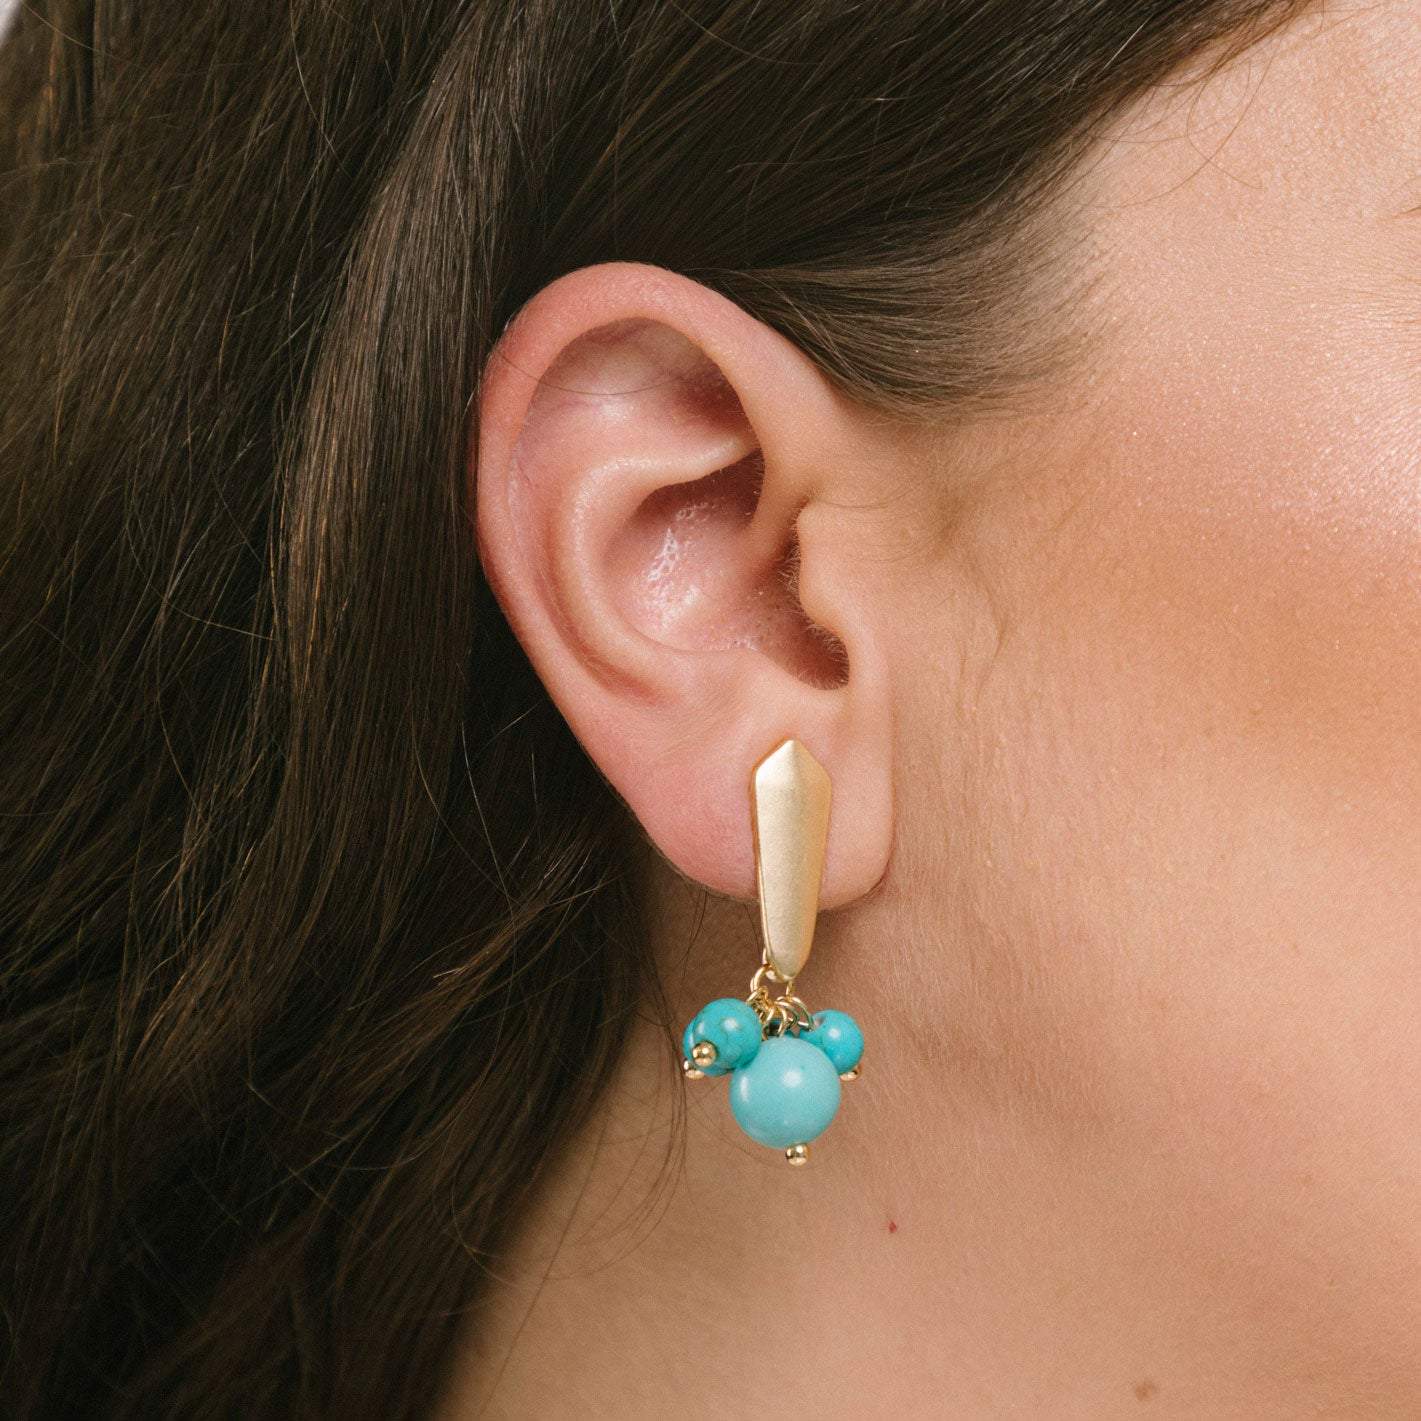 Versatile light blue clip-on earrings crafted from matte gold tone copper alloy, agate, and glass bead. Ideal for all ear types, these earrings offer a secure hold with the Clip-On style and adjustable rubber padding. Perfect for your ootd!